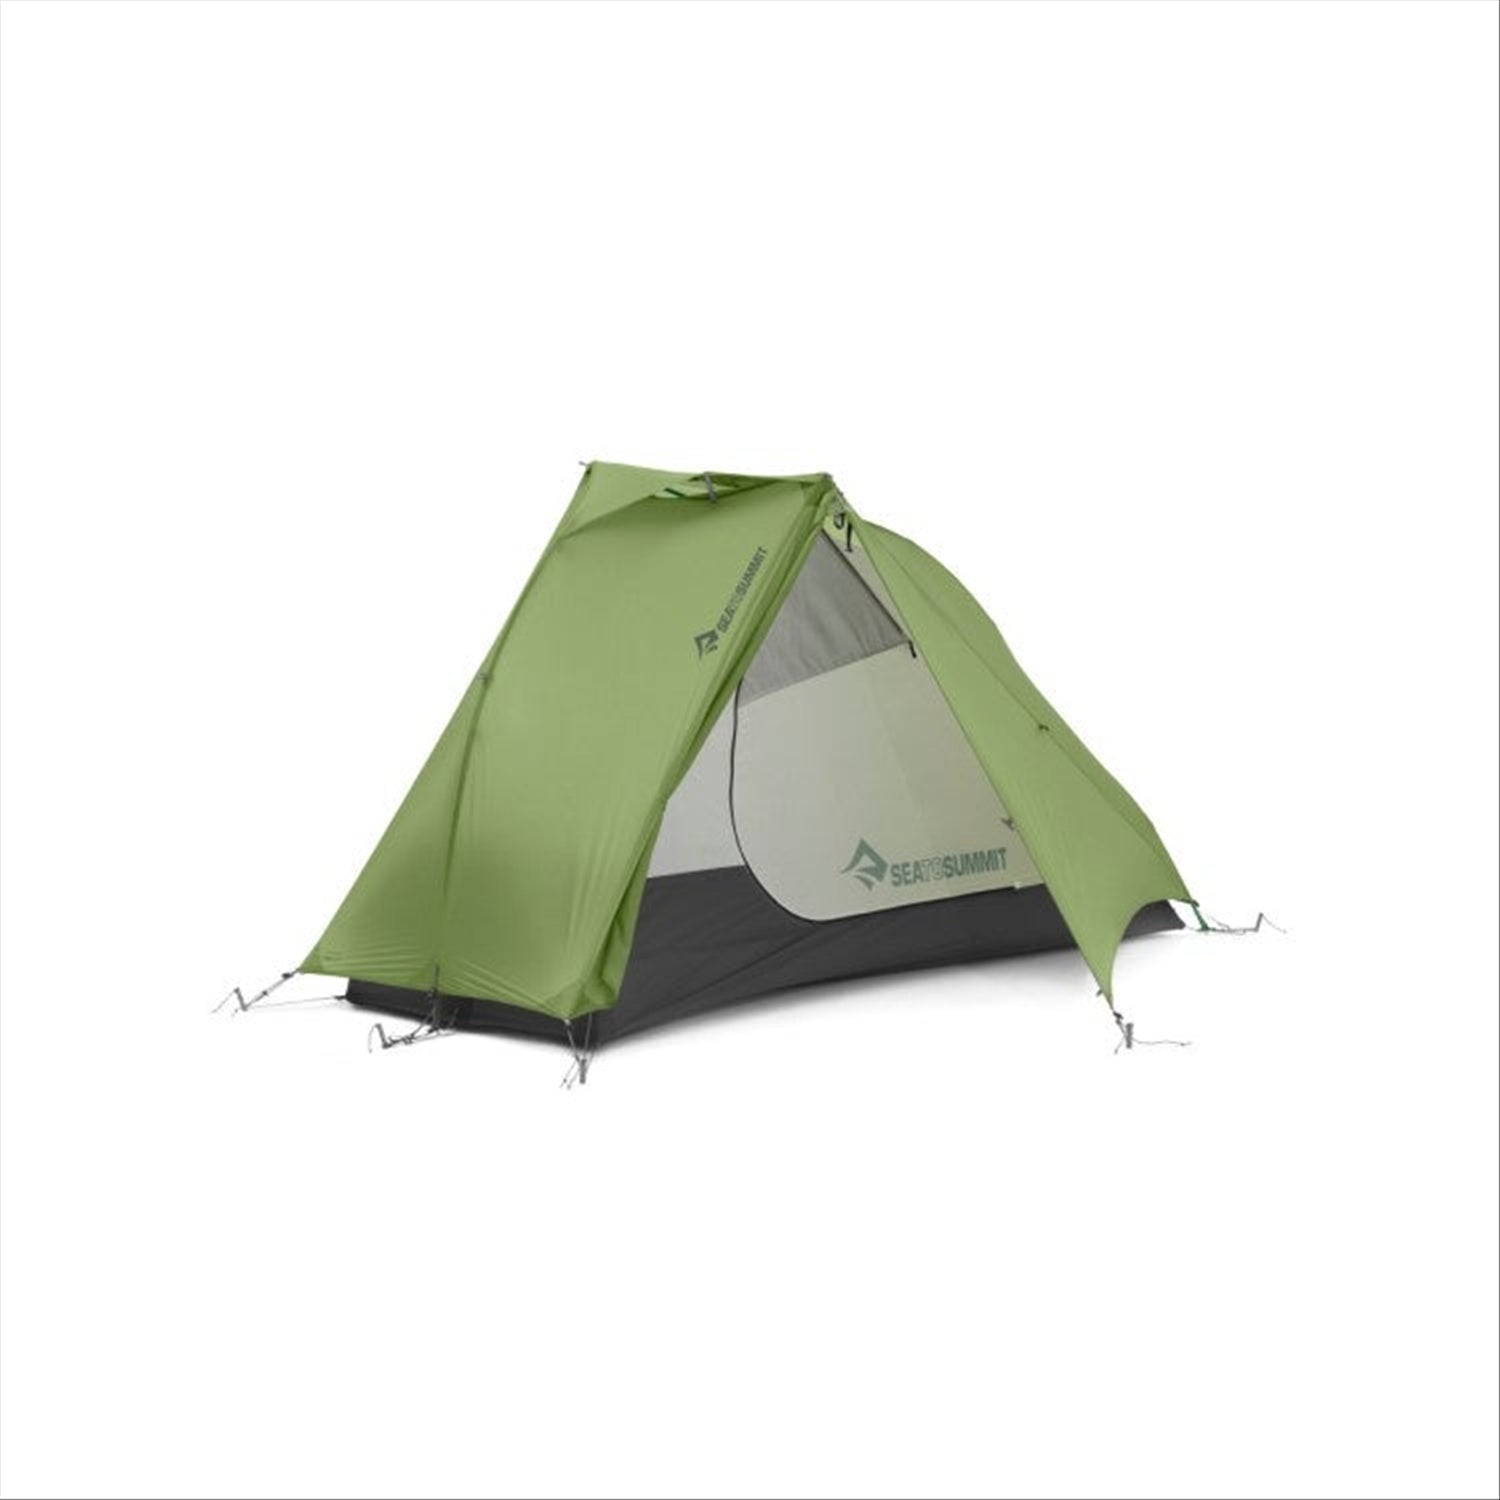 Sea to Summit Sea To Summit Alto TR1 Plus Ultralite Backpacking Tent, 1.228kg